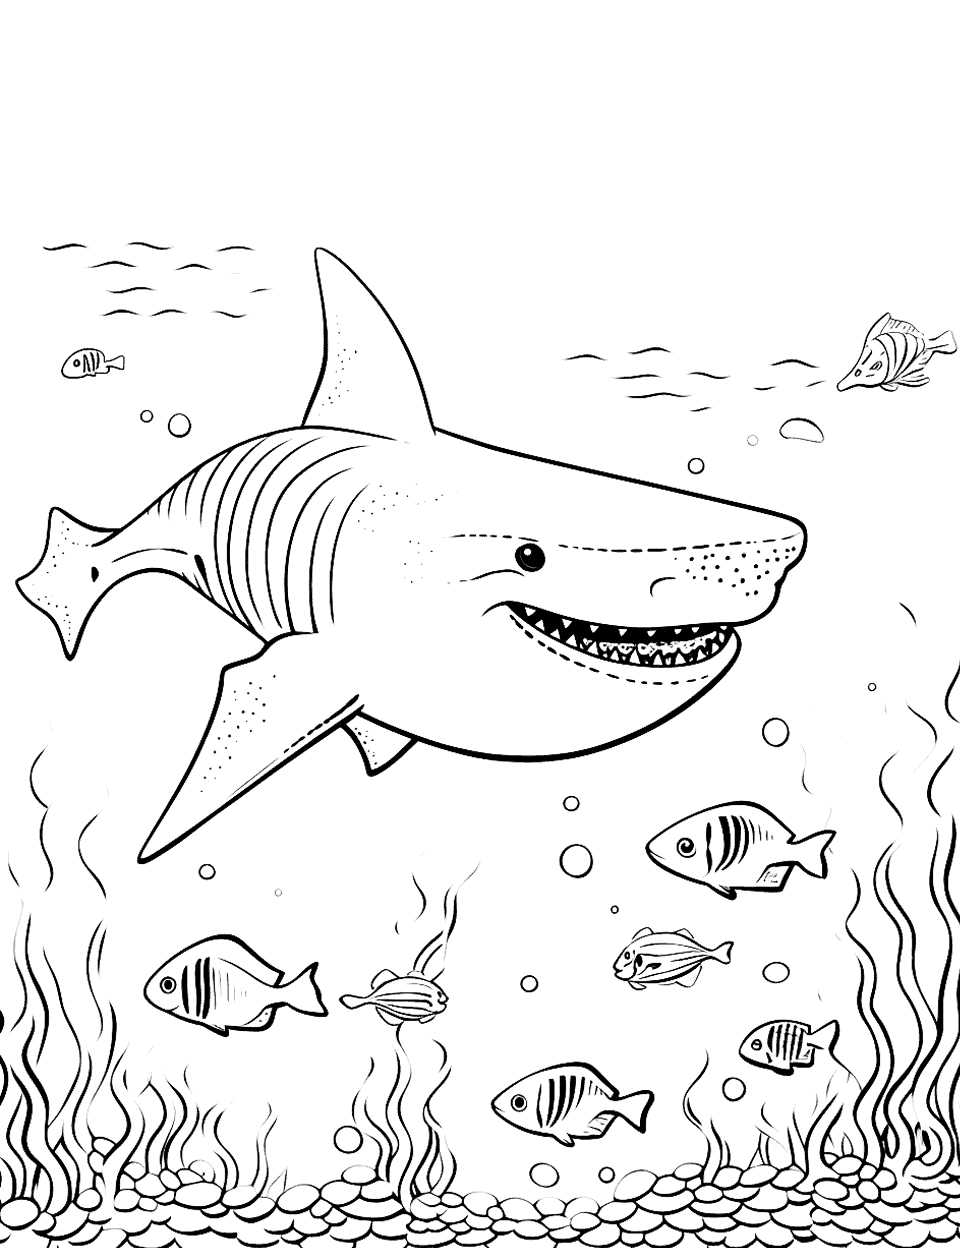 Whale Shark Migration Coloring Page - A scene depicting a whale shark migration.